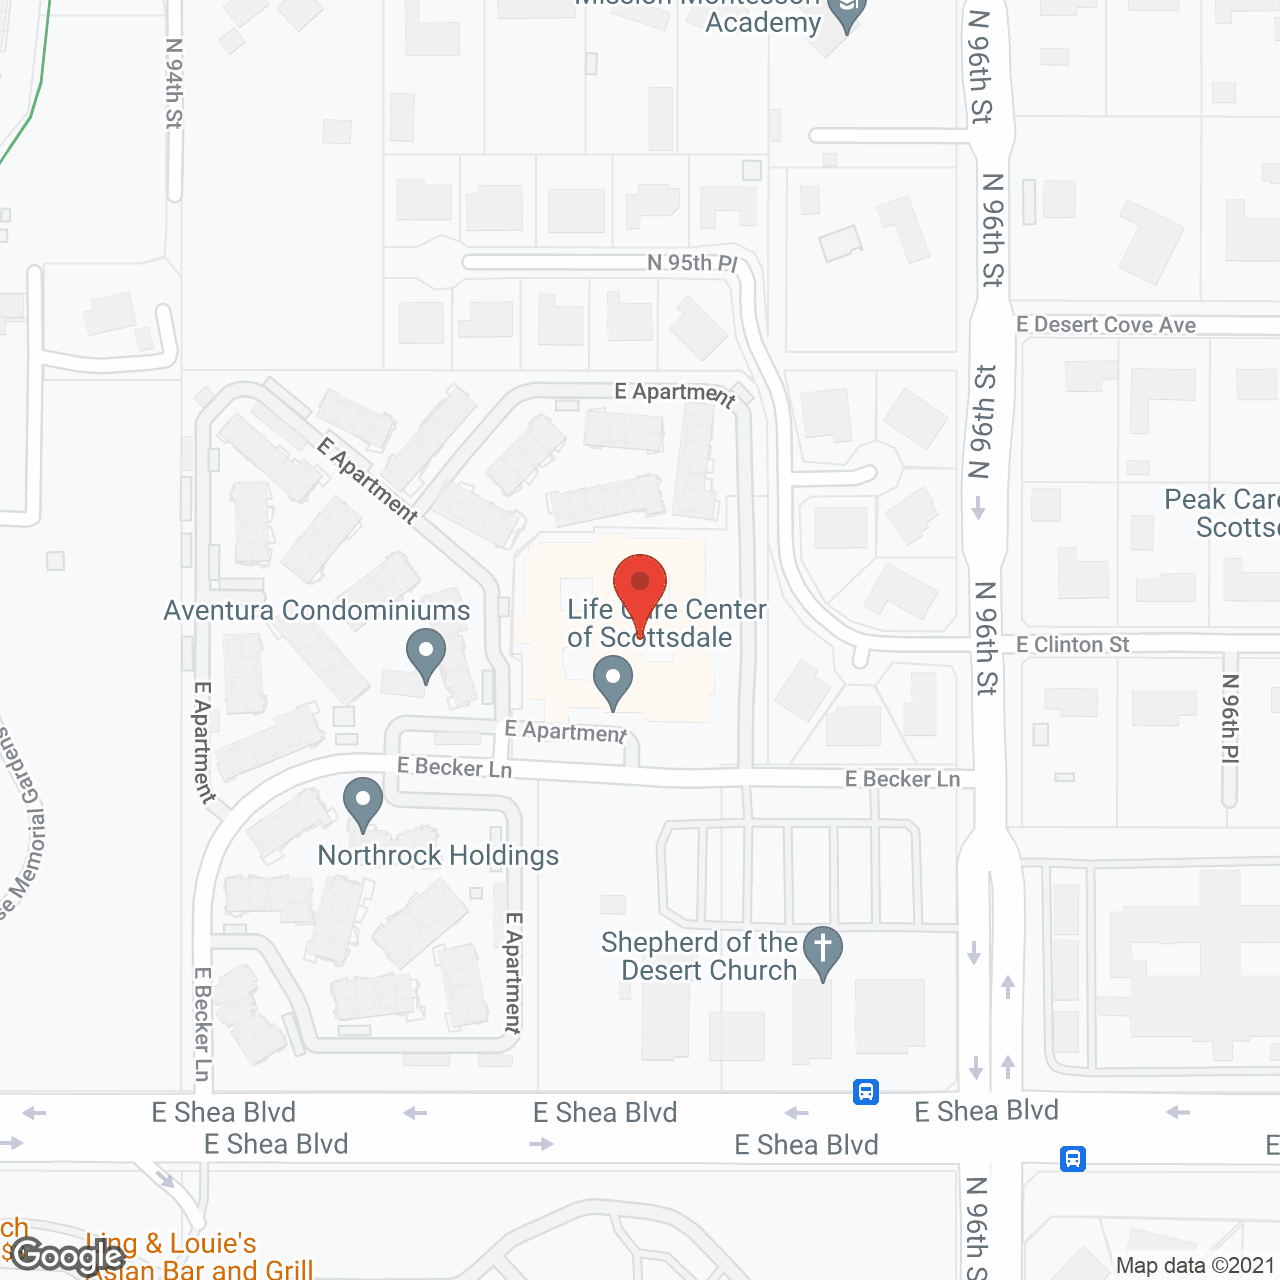 Life Care Center of Scottsdale in google map